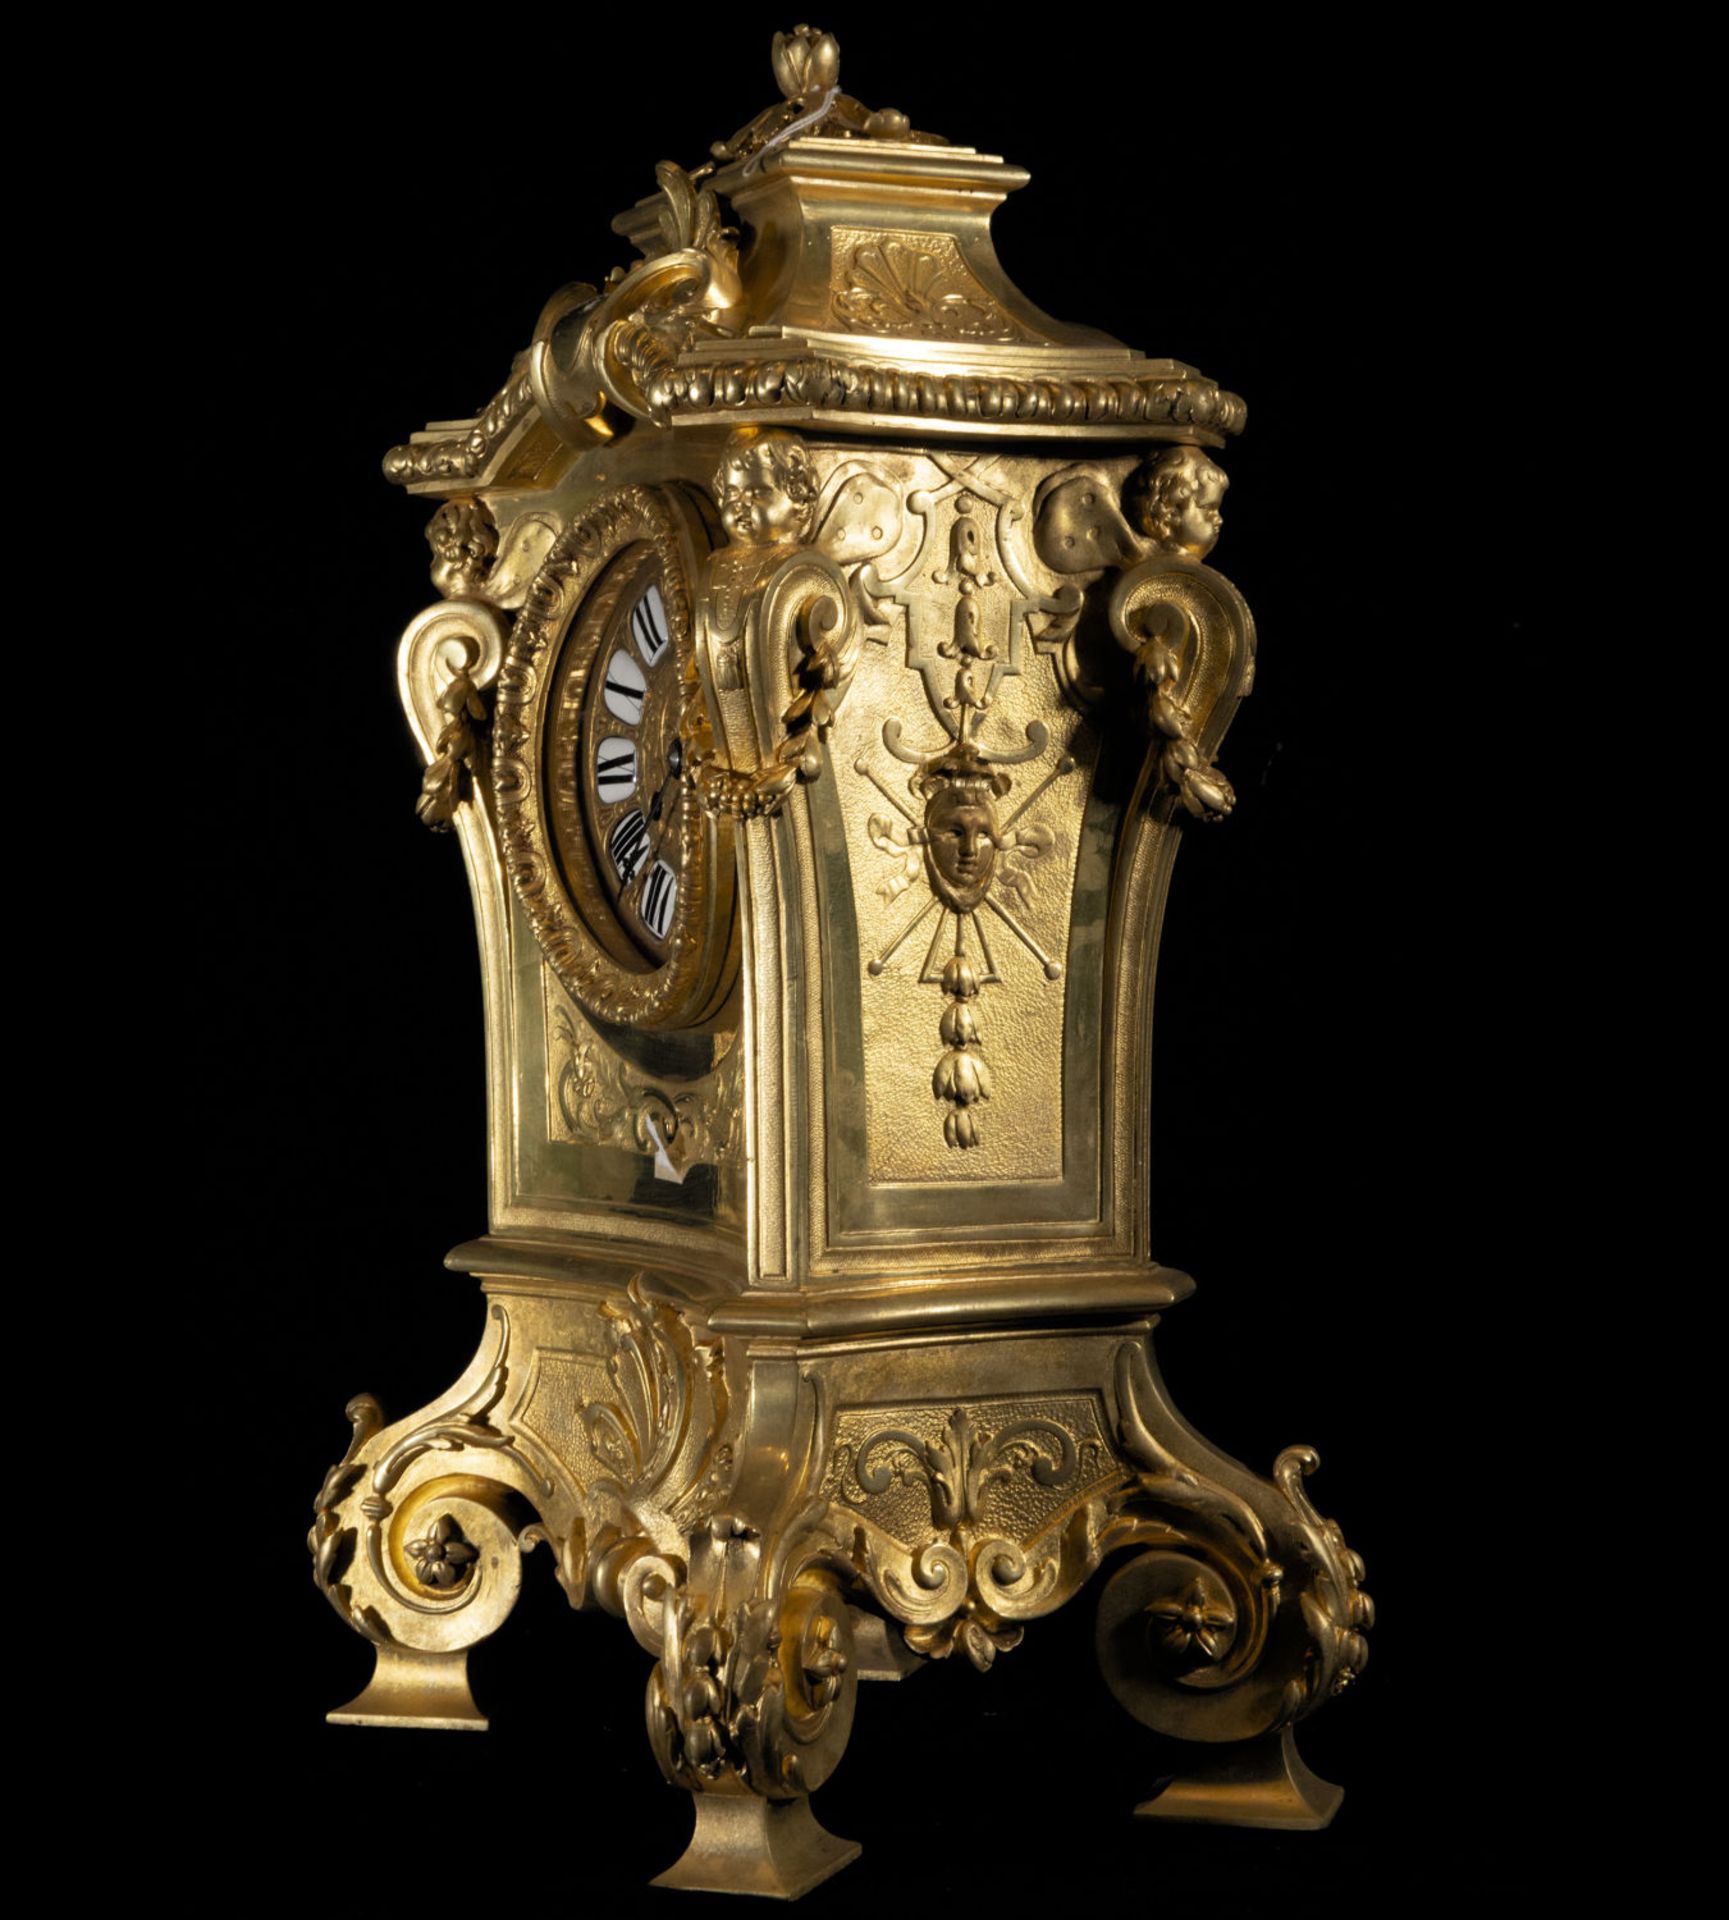 French Napoleon III Portico table clock in mercury gilded bronze from the 19th century - Image 3 of 6